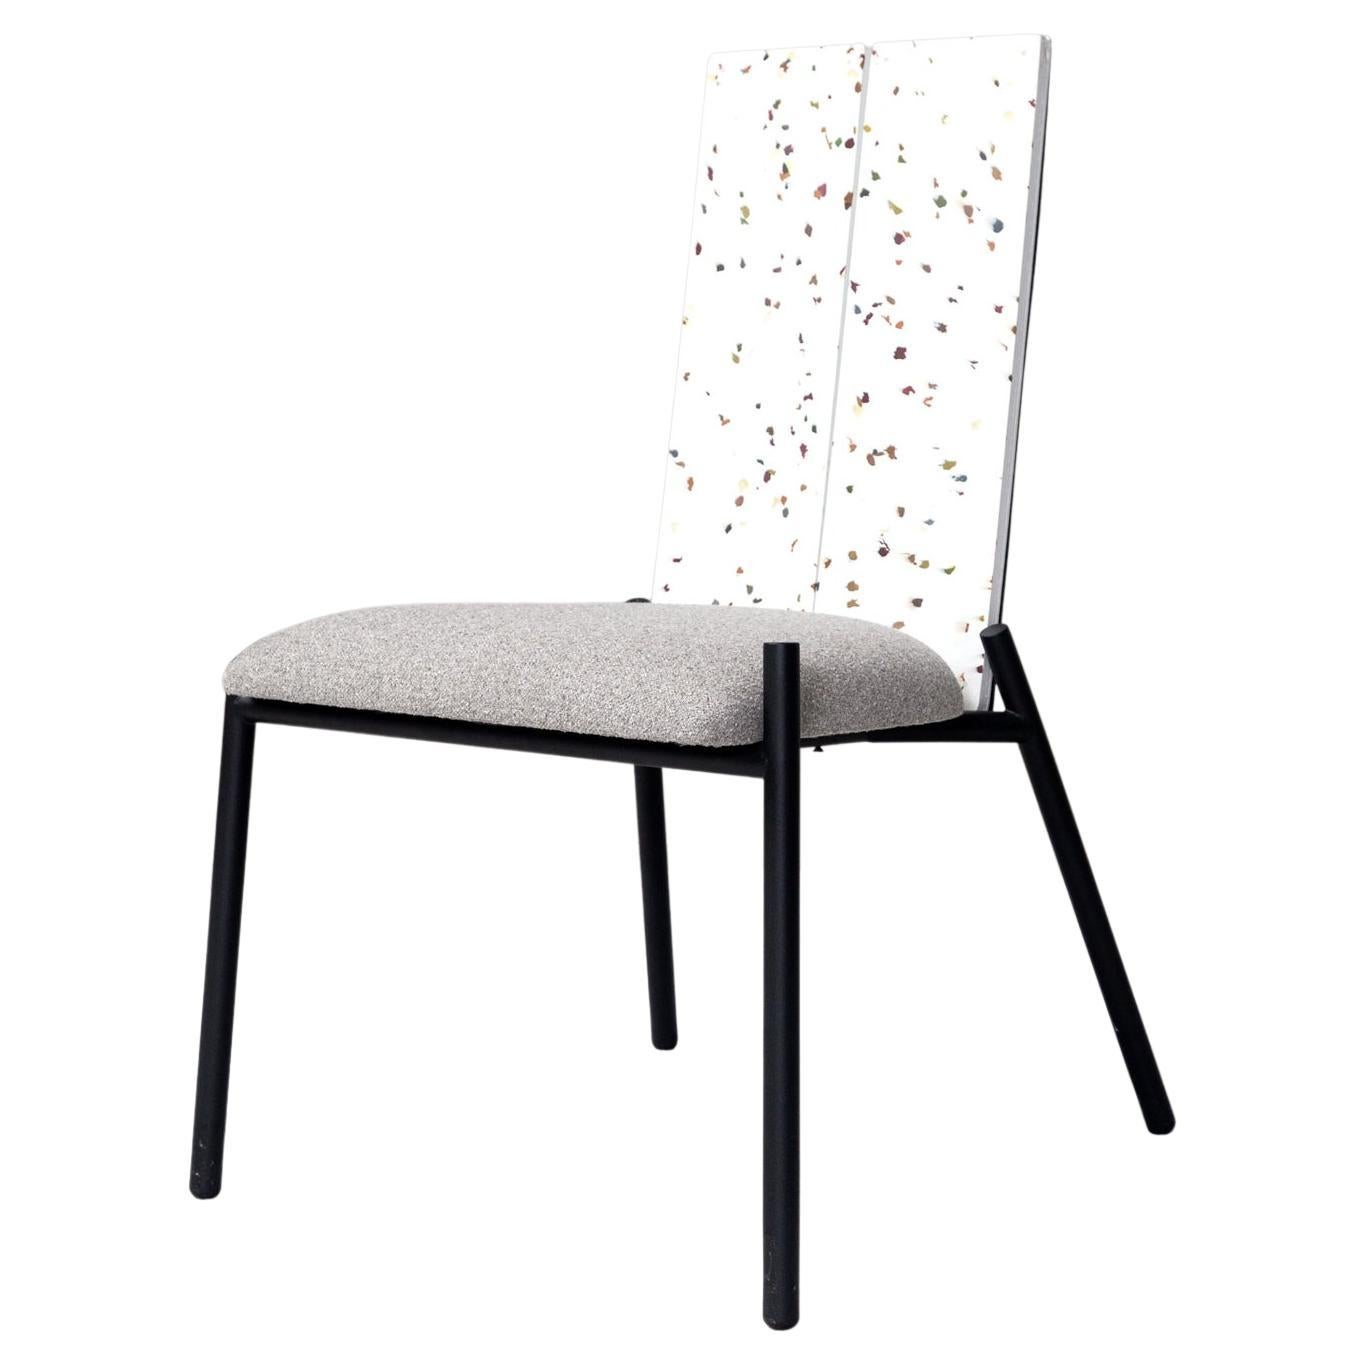 Euphoria chair with recycled PP backrest by Gabriel Freitas